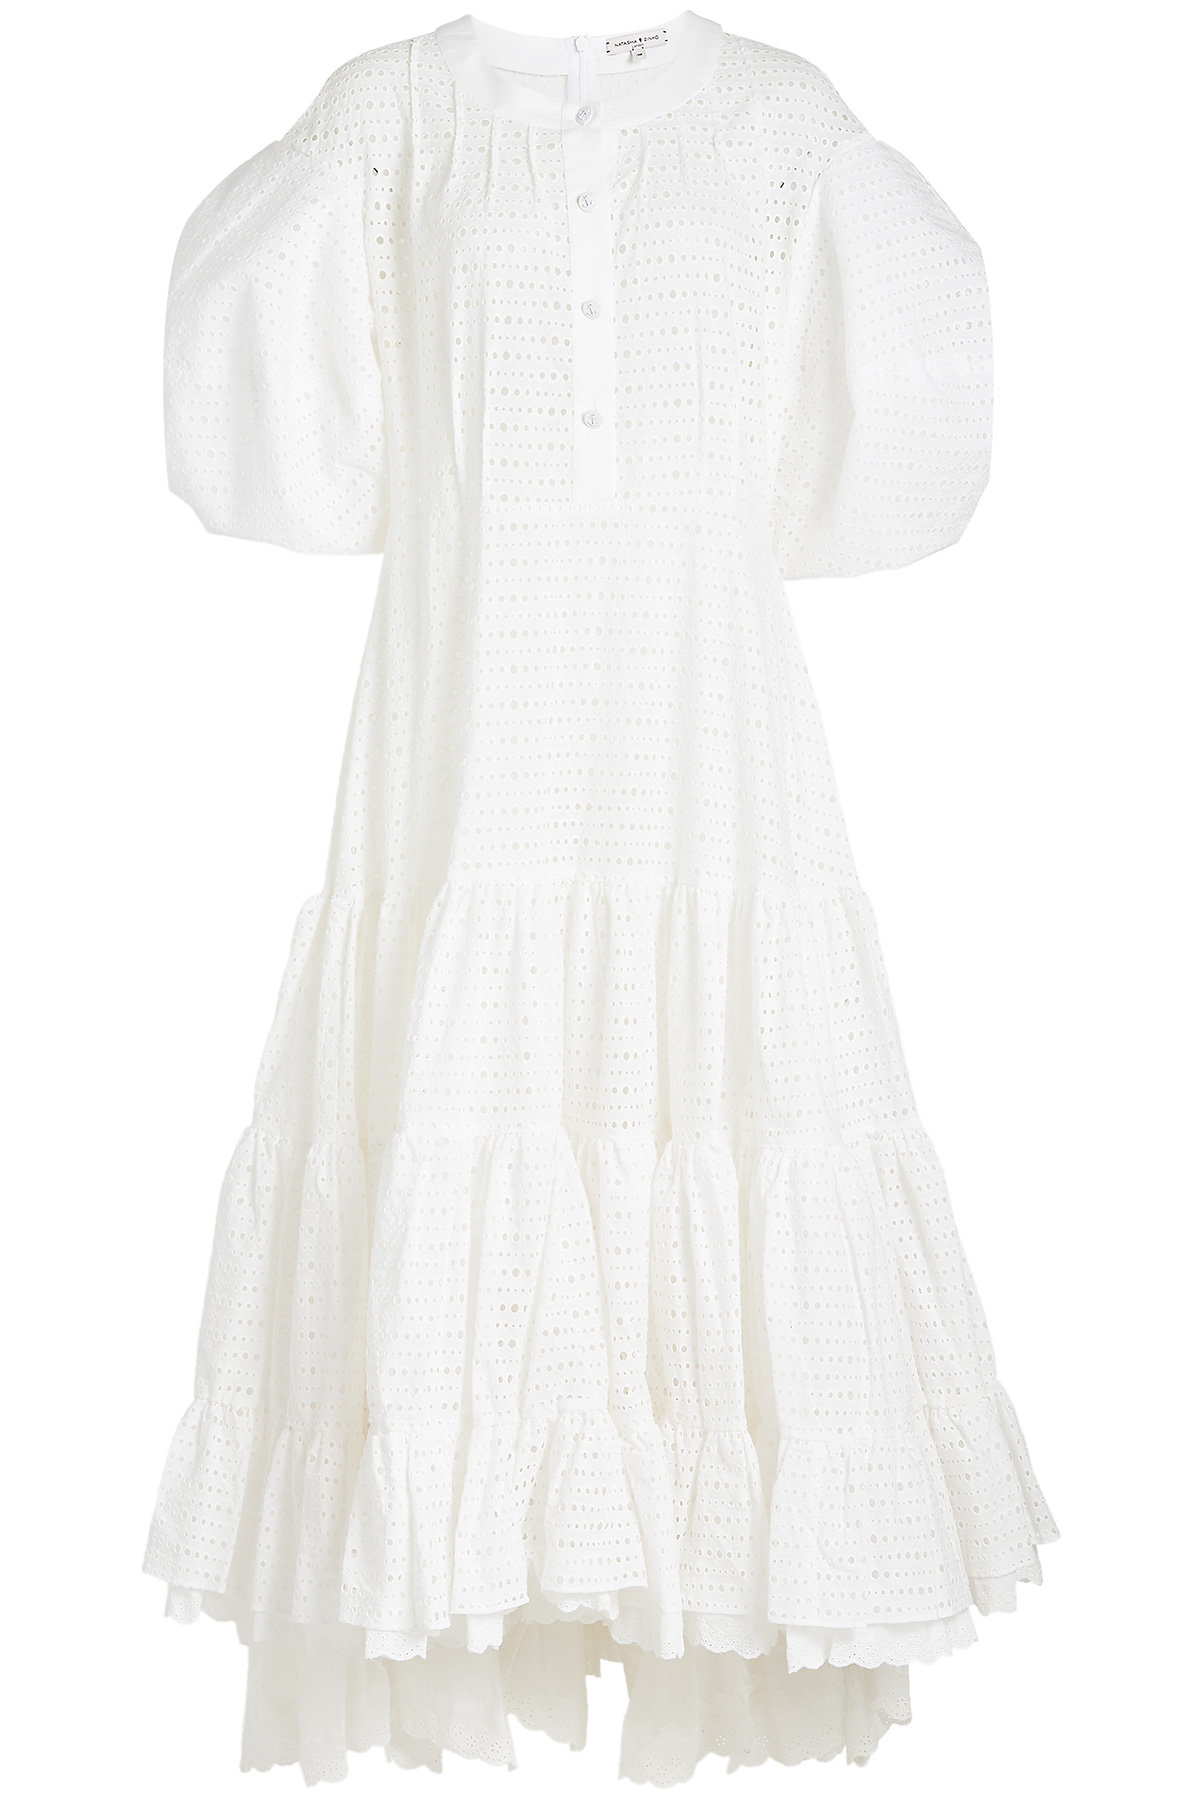 Cotton Dress with Eyelet Cut-Out Detail by Natasha Zinko